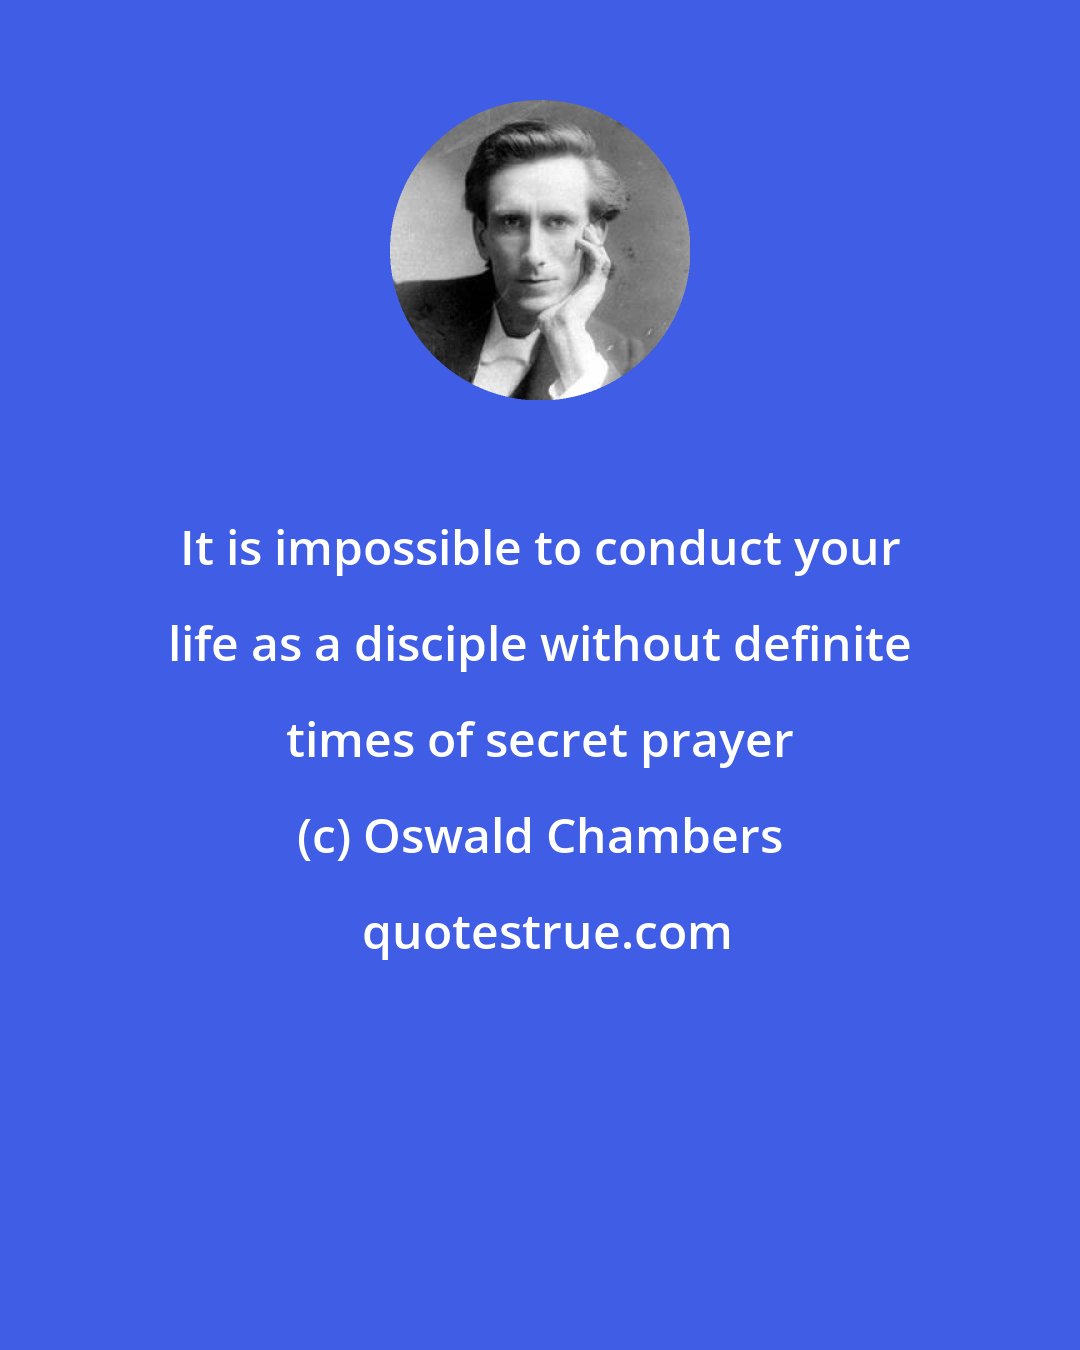 Oswald Chambers: It is impossible to conduct your life as a disciple without definite times of secret prayer